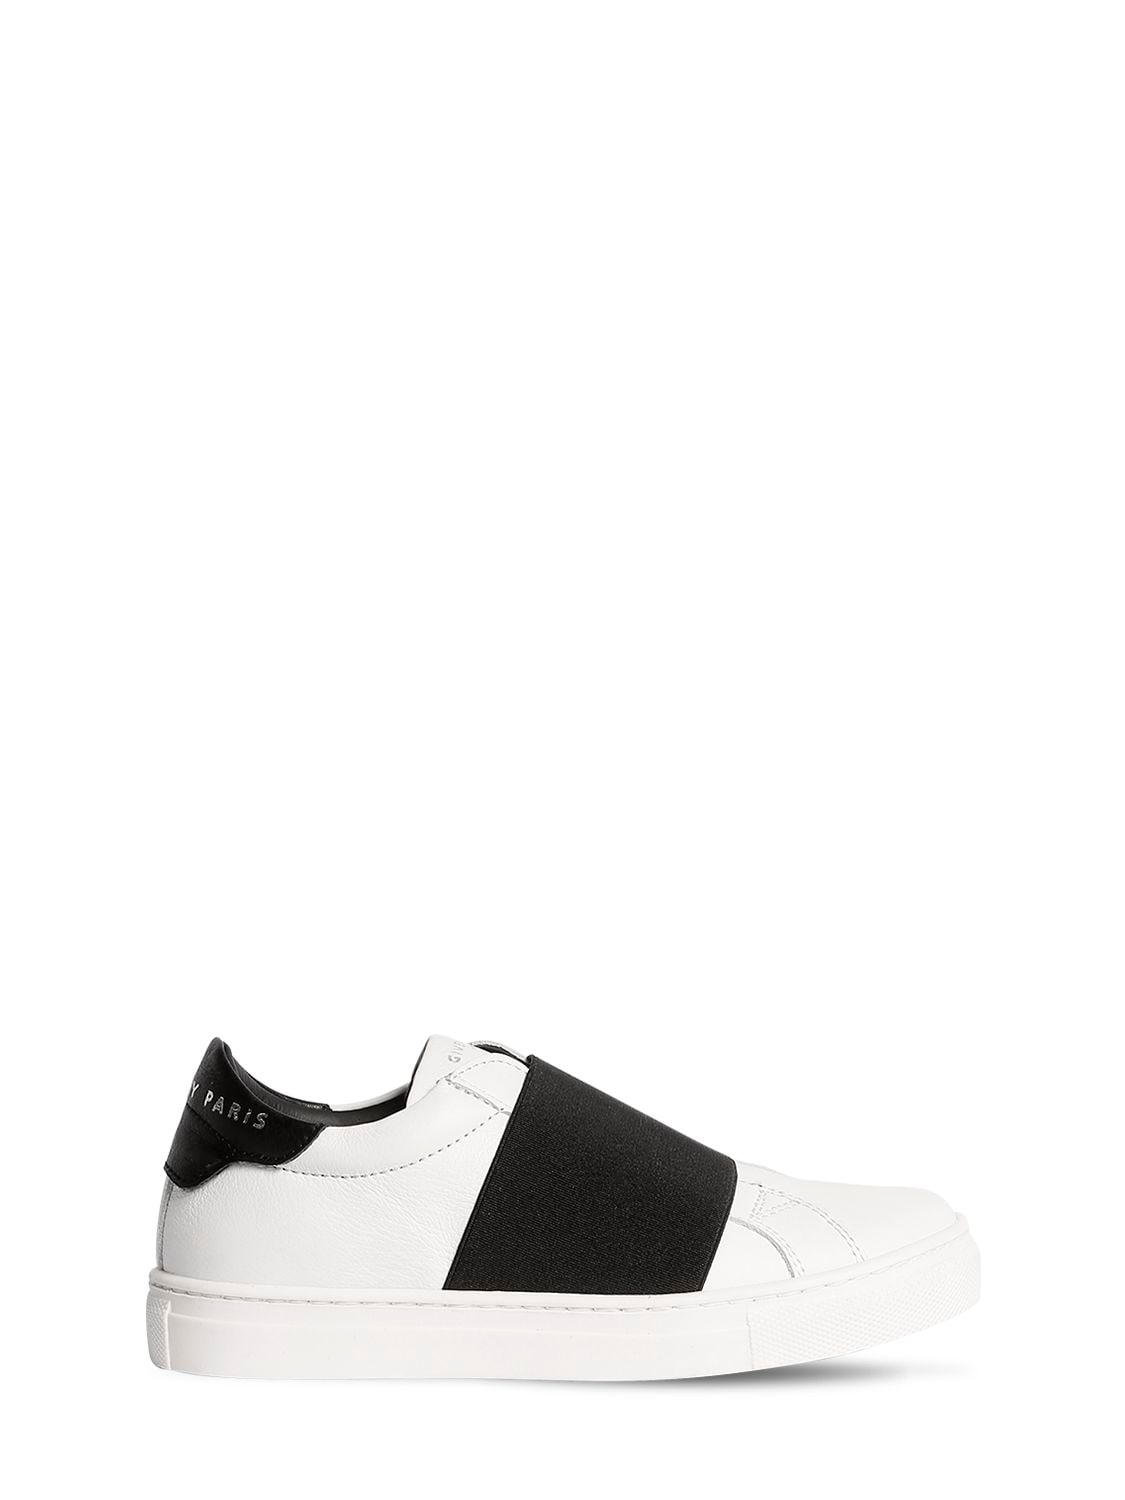 GIVENCHY LEATHER SLIP-ON SNEAKERS,68IOFL051-TJUW0